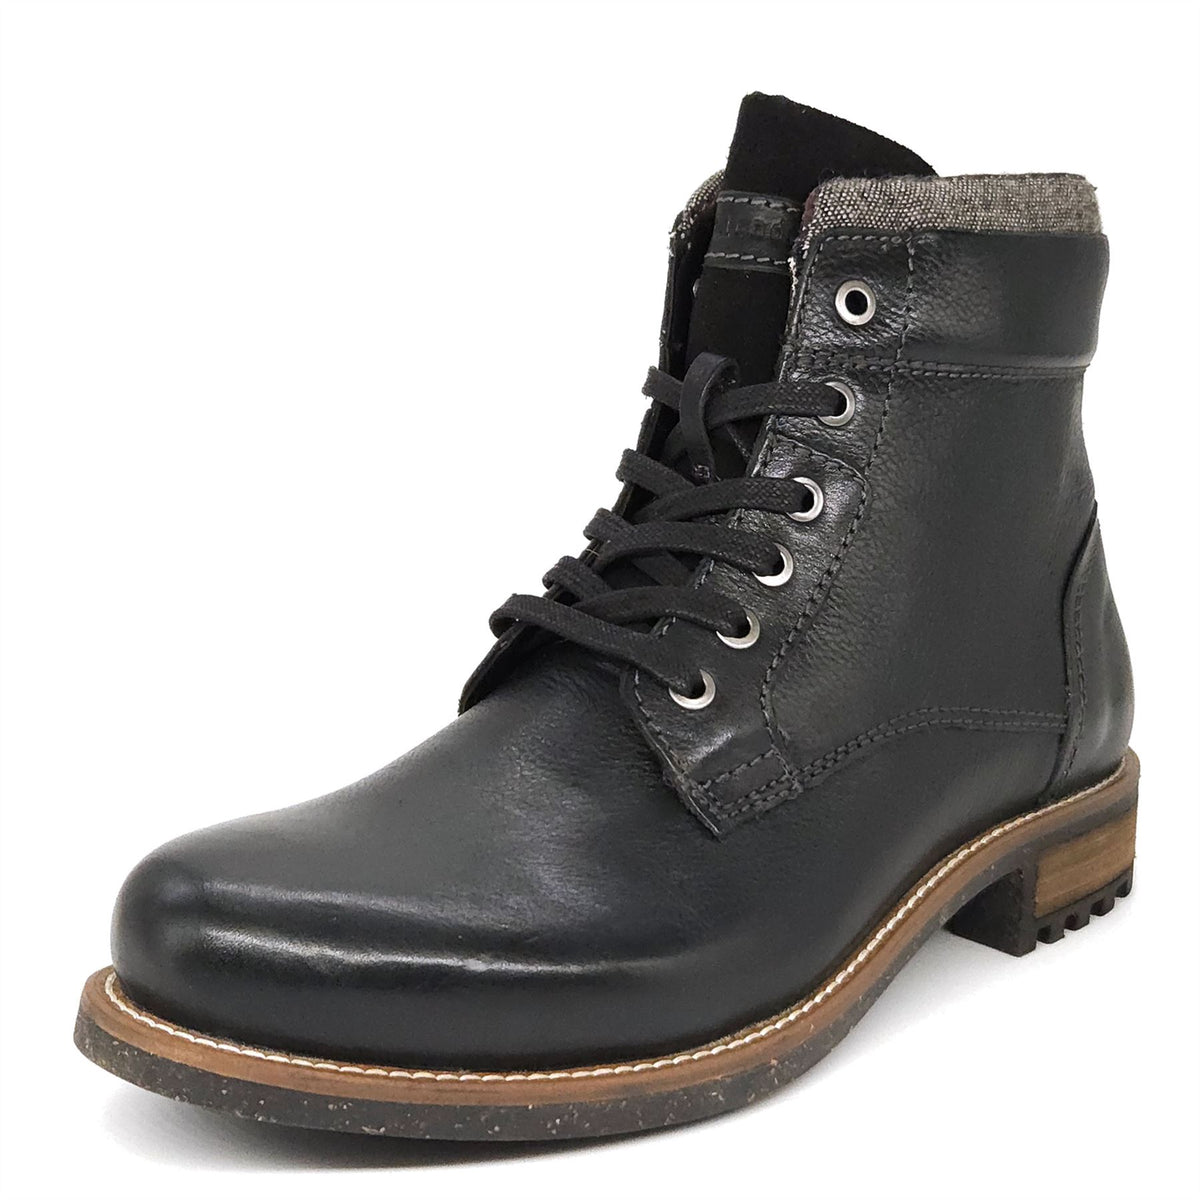 Hounslow Lace Up Boots